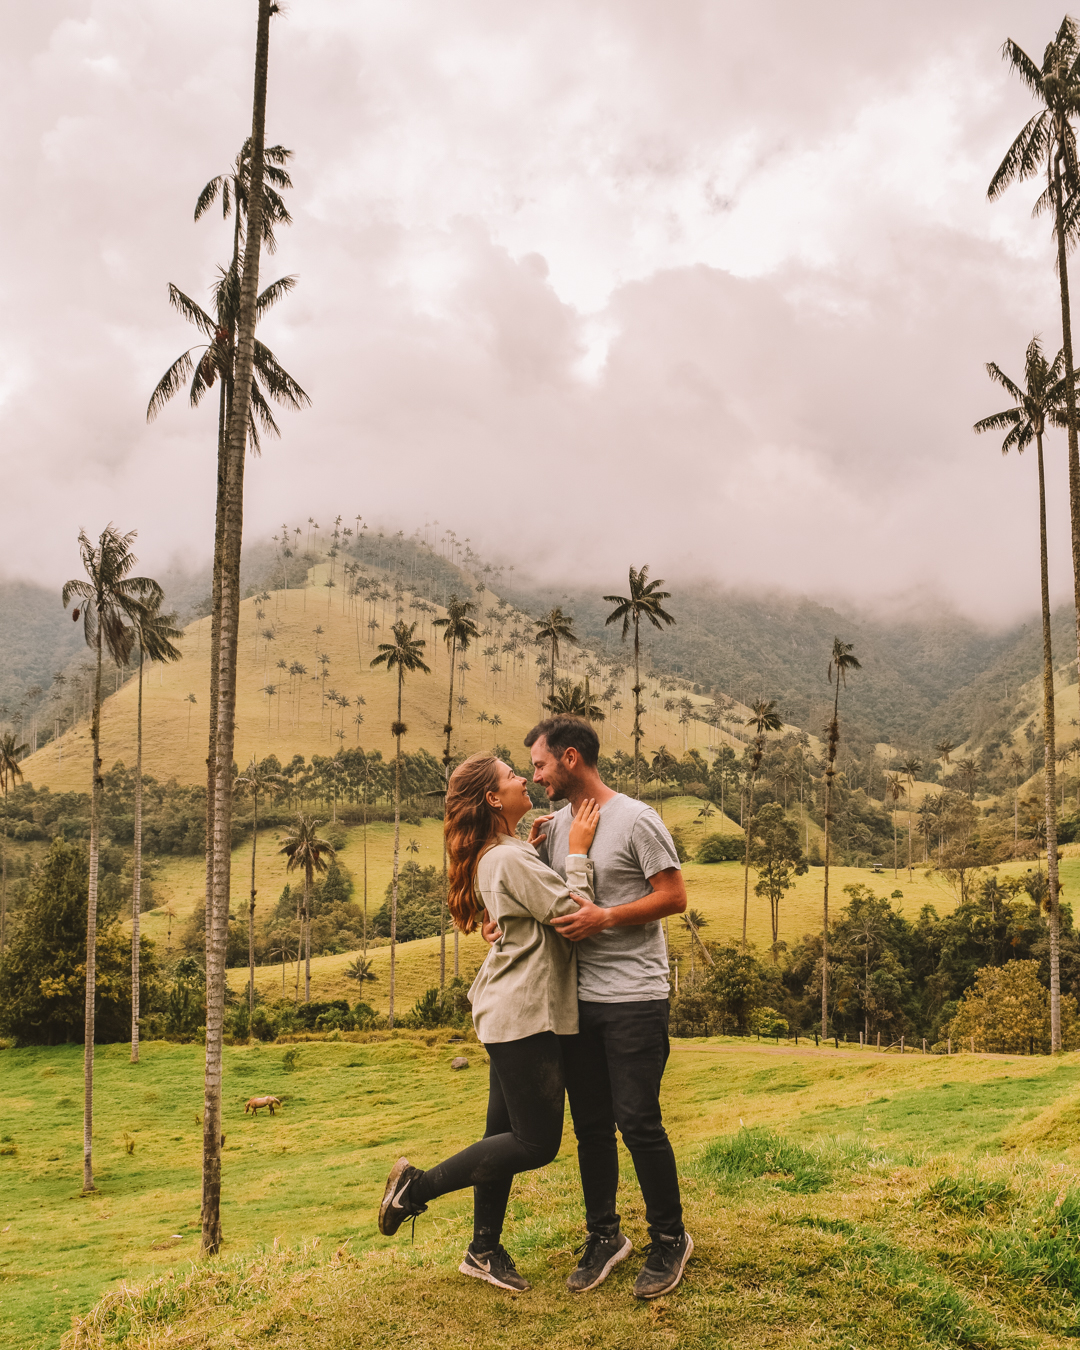 Travelling to Colombia? Visit The Cocora Valley